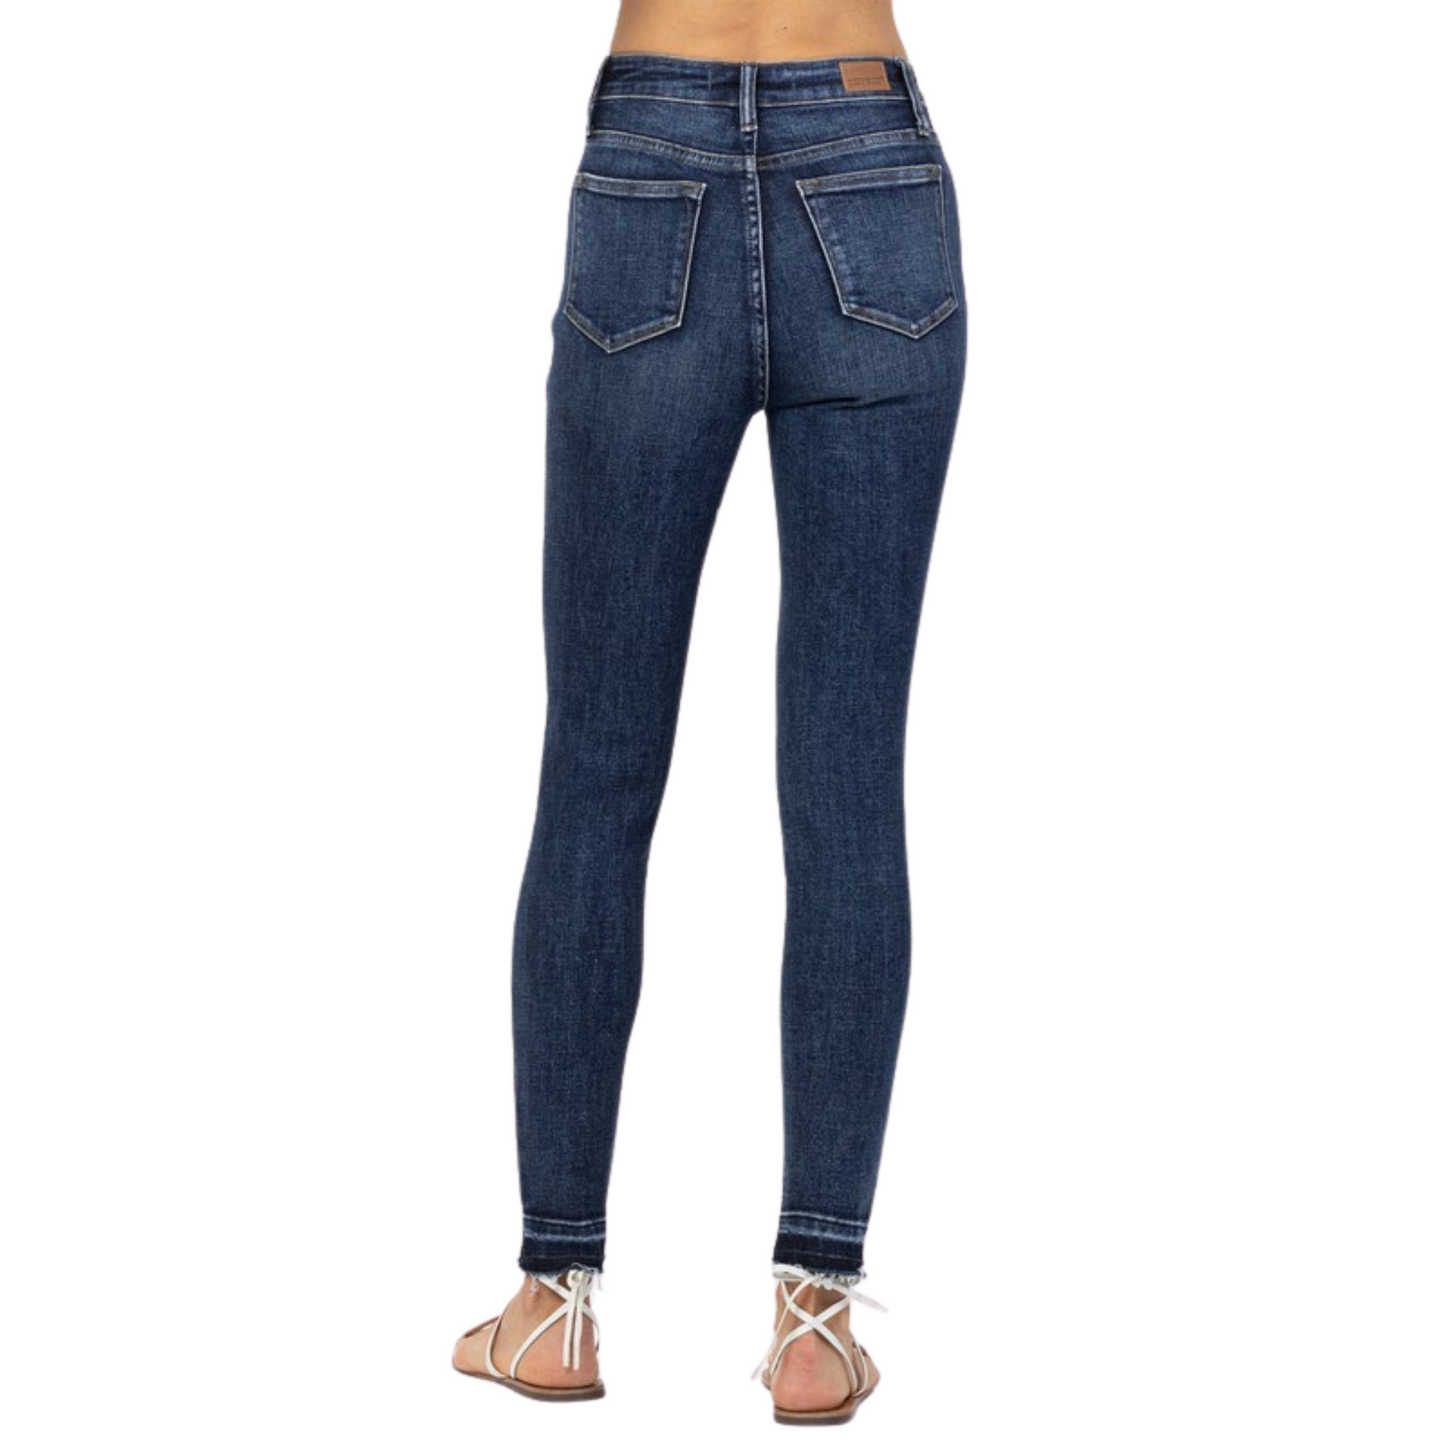 These High Waist Tummy Control Skinny Jeans are a stylish and comfortable way to flatter your curves. Their dark wash is a timeless classic that can easily be dressed up or down, and the high waist and skinny fit provide a flattering silhouette to any body type.